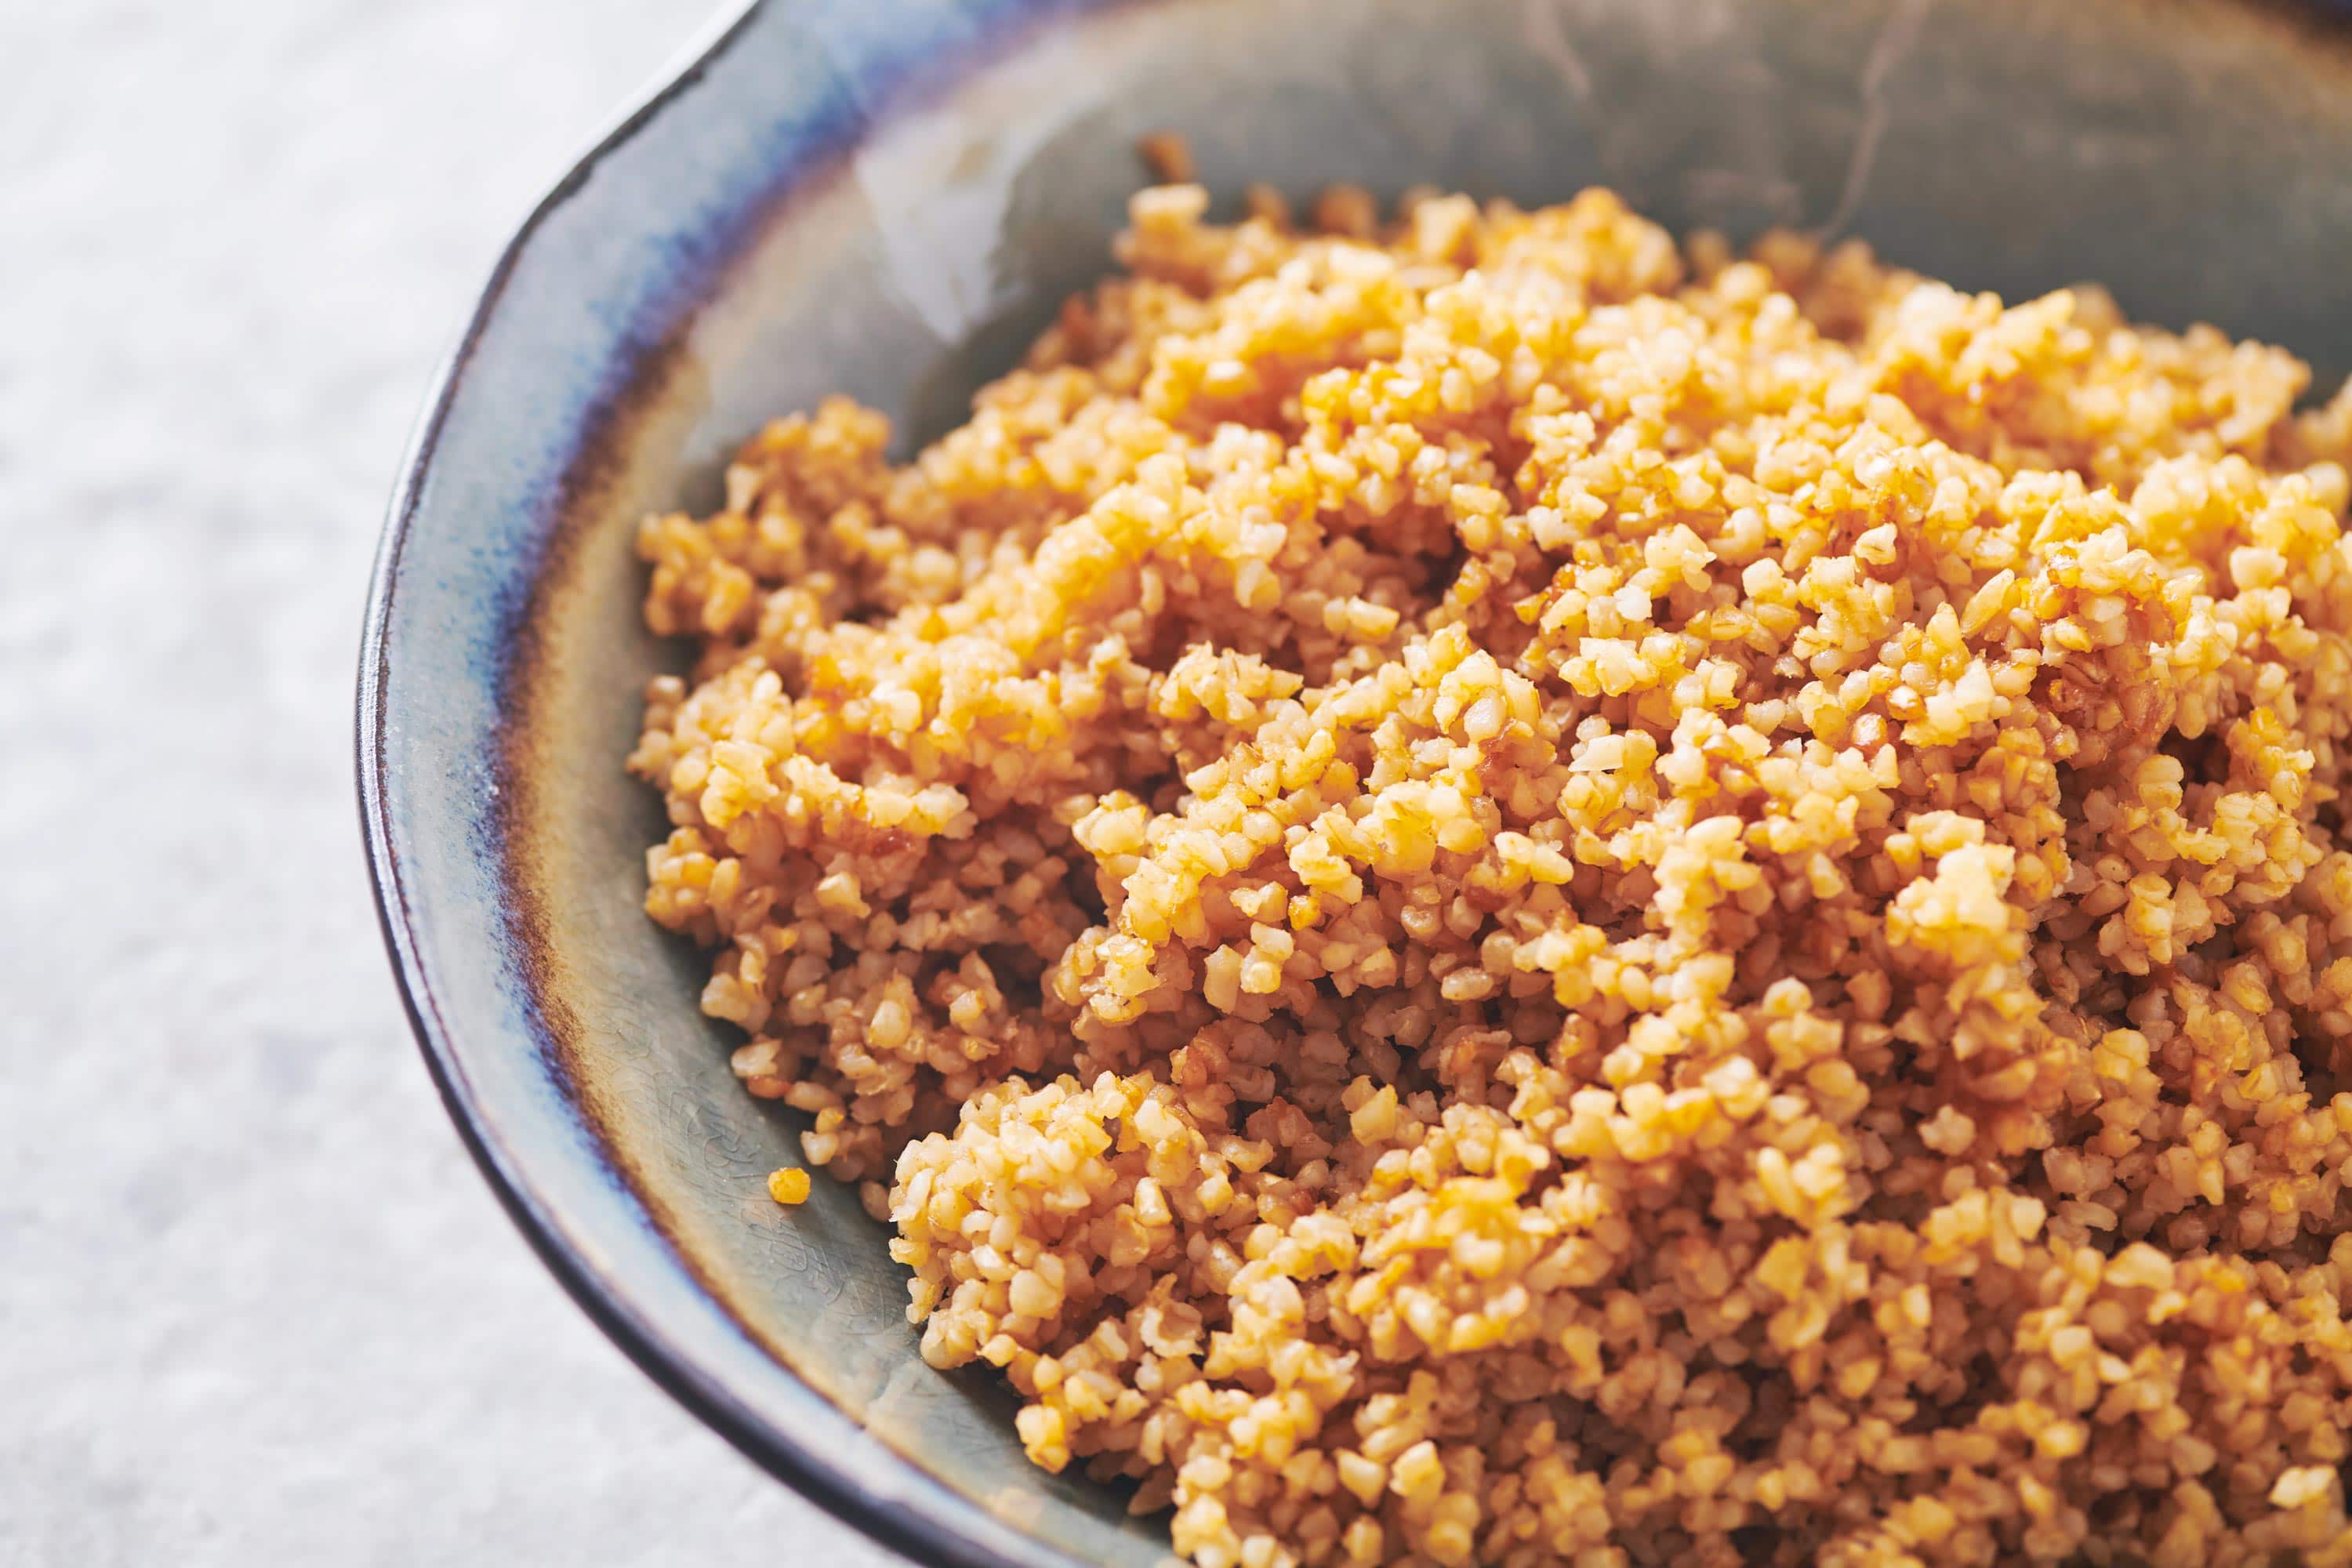 A bowl of cooked bulgur wheat.